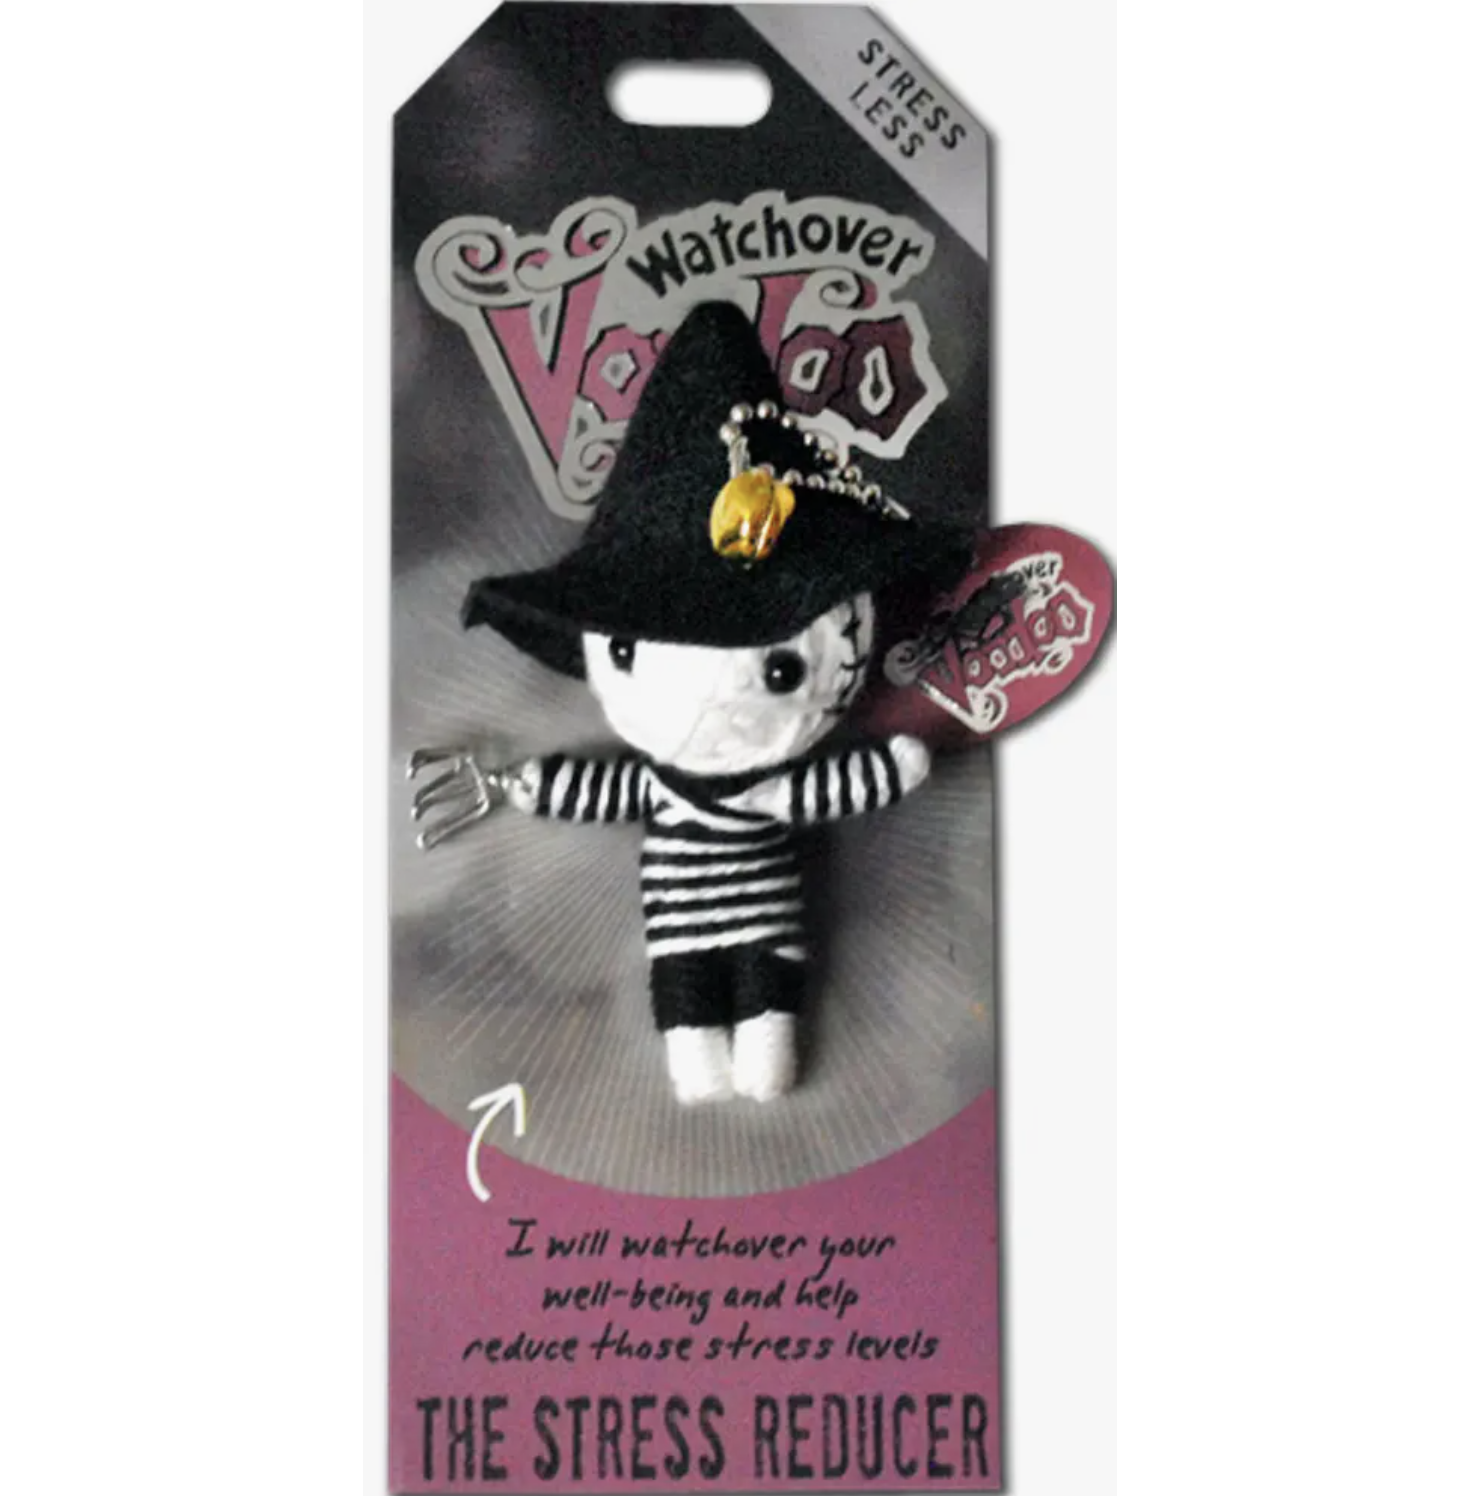 The Stress Reducer Voodoo Doll